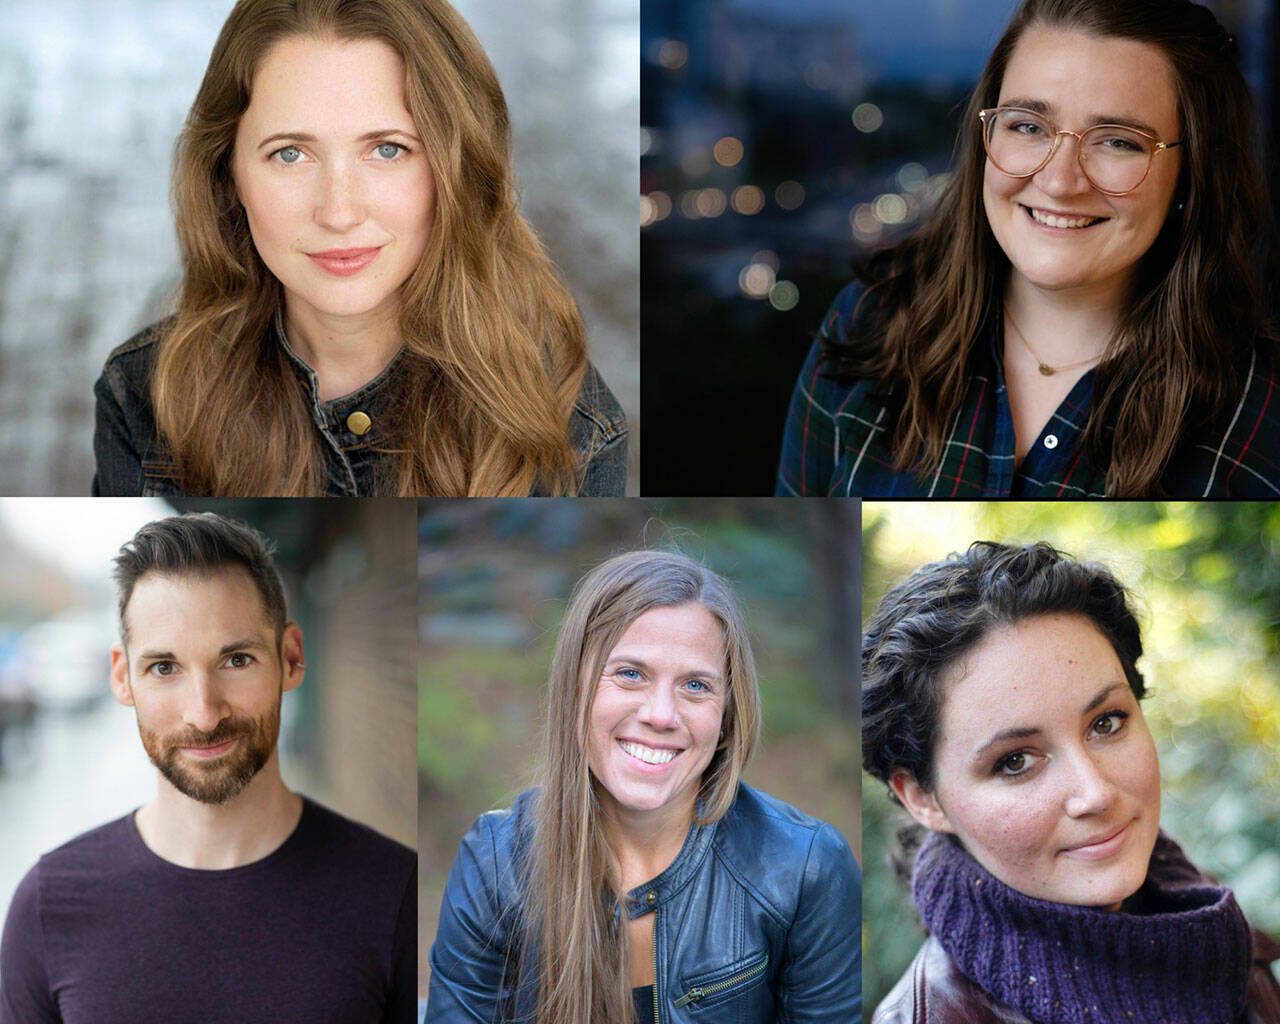 (Courtesy Photo) Members of Pacific Northwest Theatrical Intimacy, (top, left to right) Alyssa Kay, Kate Drummond and (bottom, left to right) Ian Bond, Emily Rollie, Jess K Smith will present a workshop, “Foundations in Theatrical Intimacy,” on Saturday, Oct. 30, on Zoom.